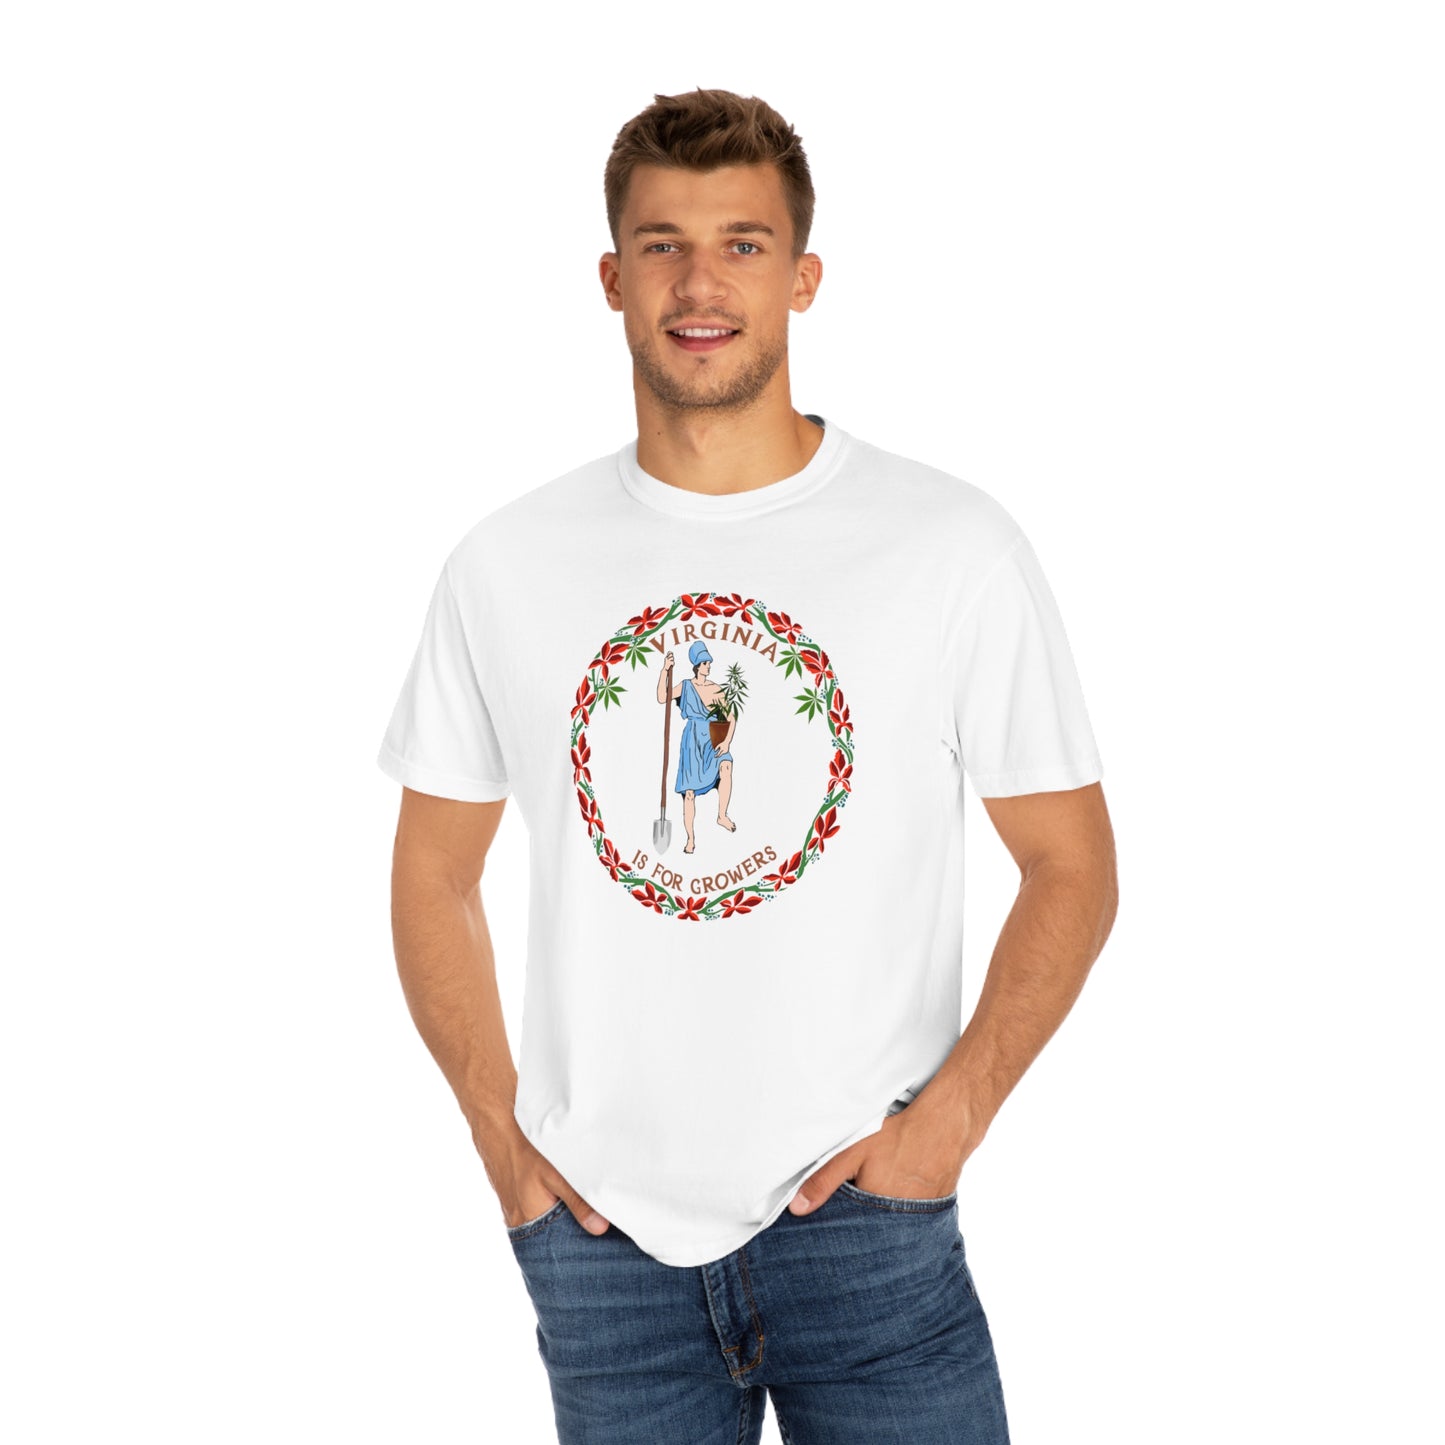 Virginia Is For Growers Unisex Tee-Shirt, White (S, M, L, XL)